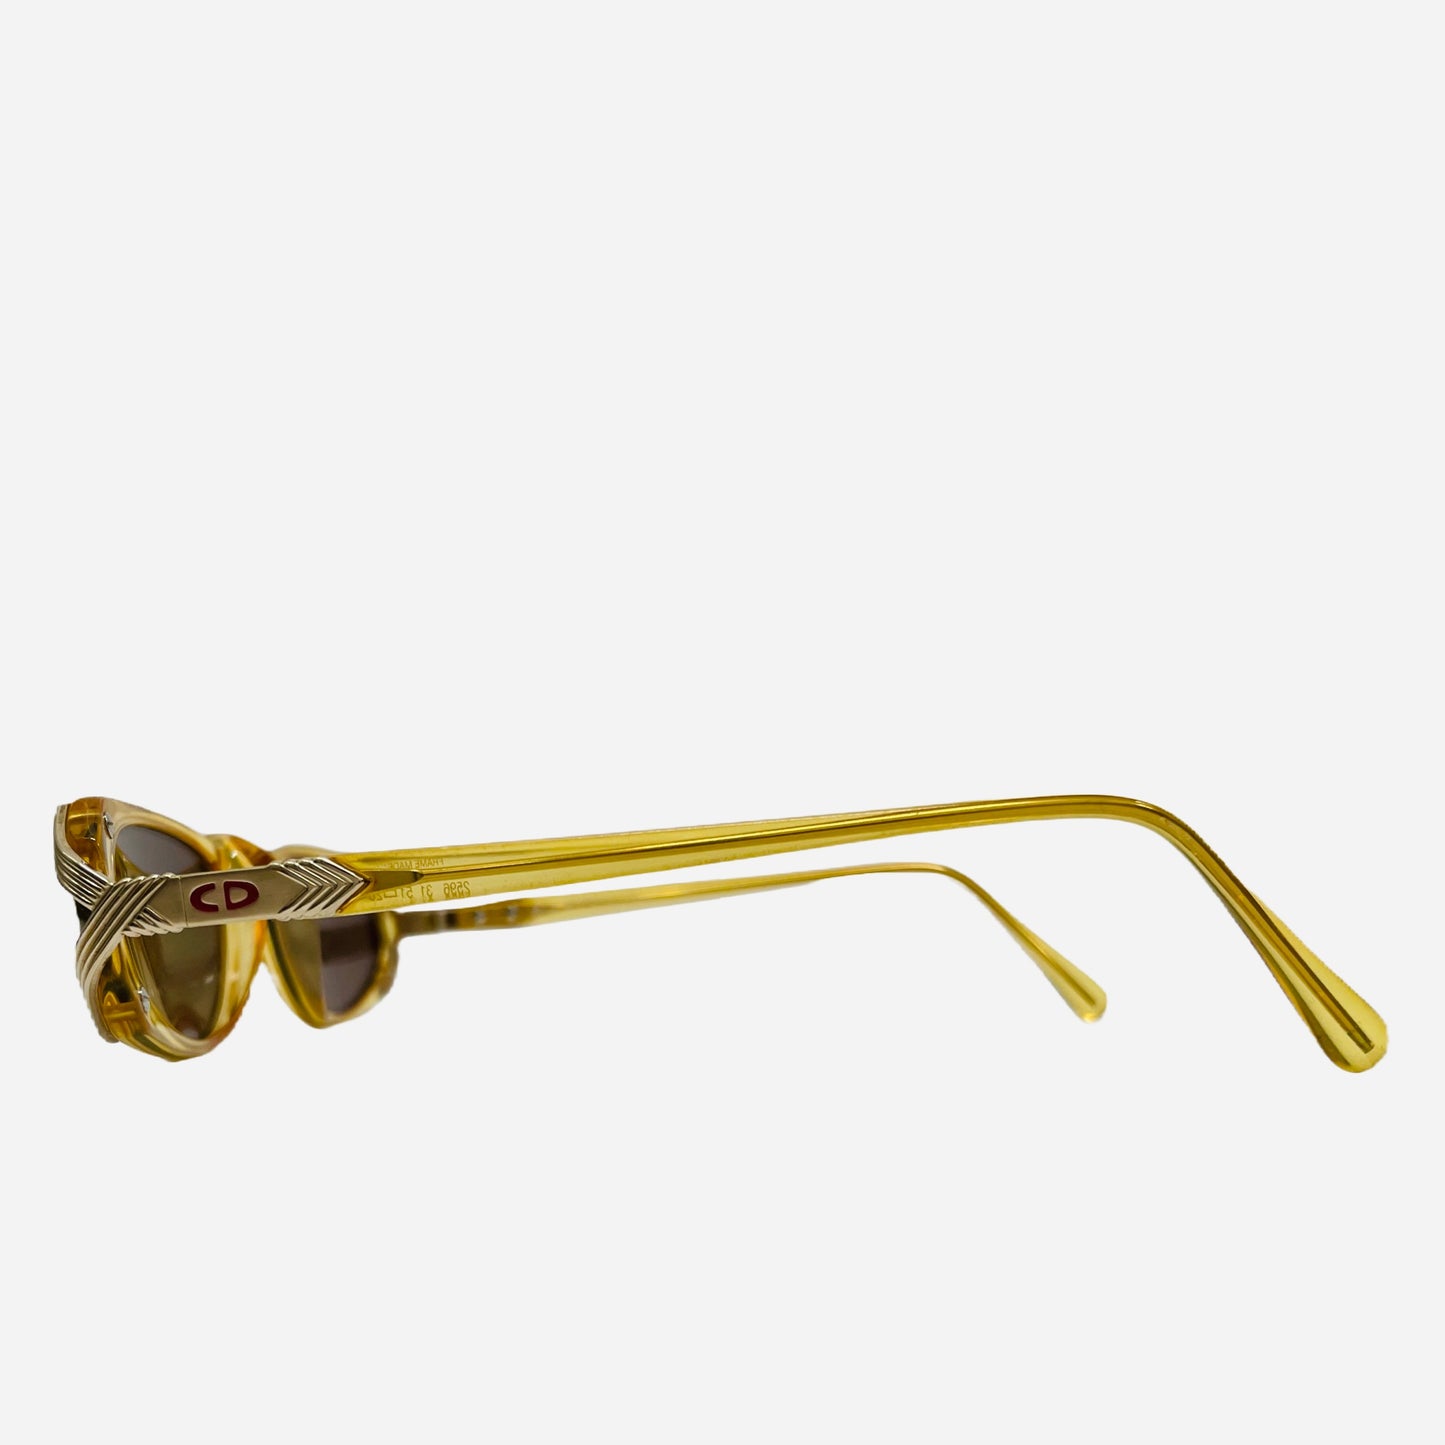 Vintage-Christian-Dior-Sonnenbrille-Sonnenbrille-2596-Optyl-the-seekers-side-1